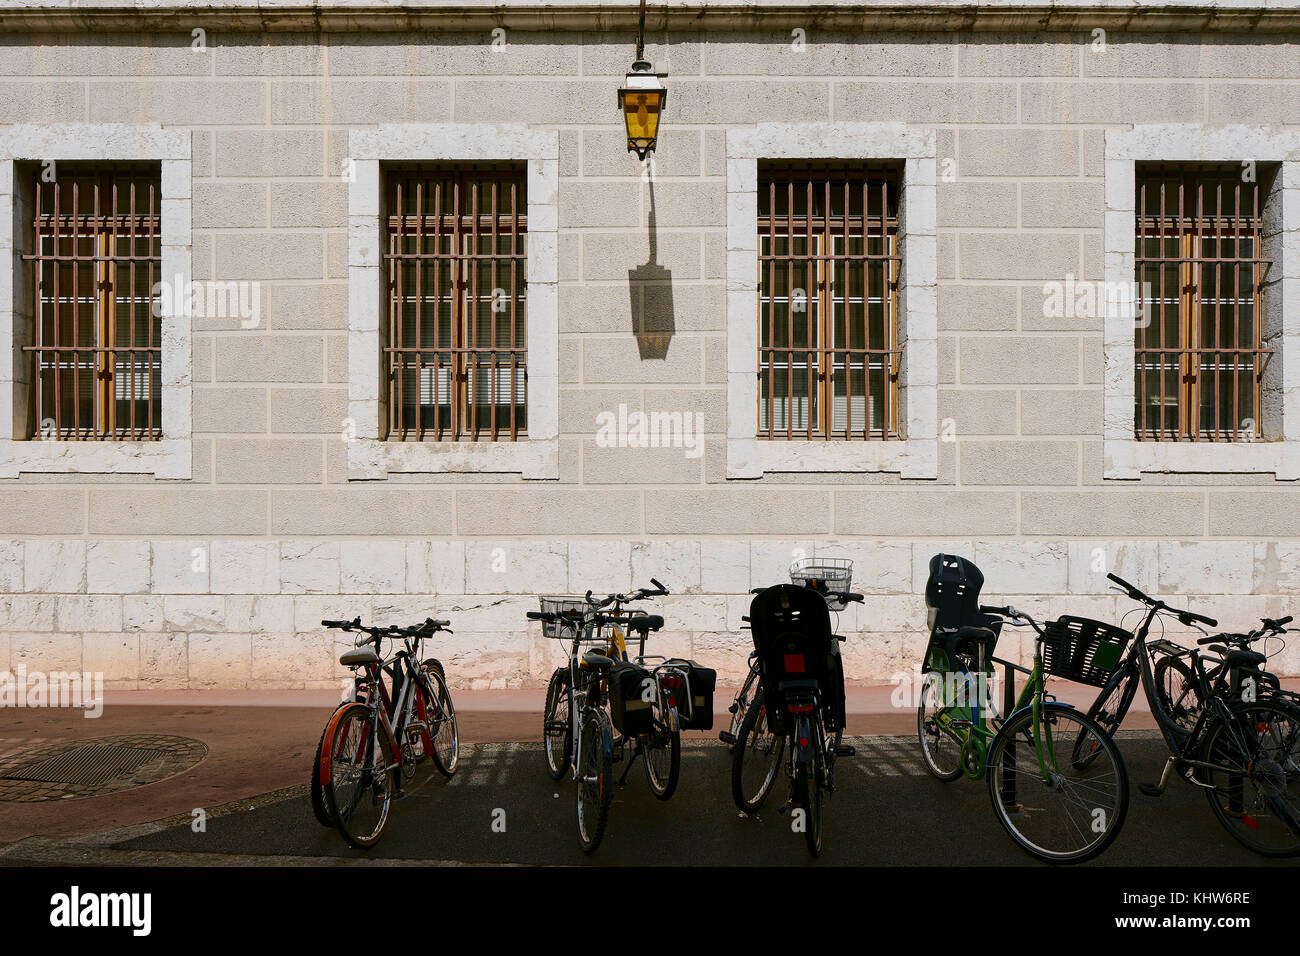 Row of bicycles parked outside building, Annecy, Auvergne-Rhone-Alpes, France Stock Photo